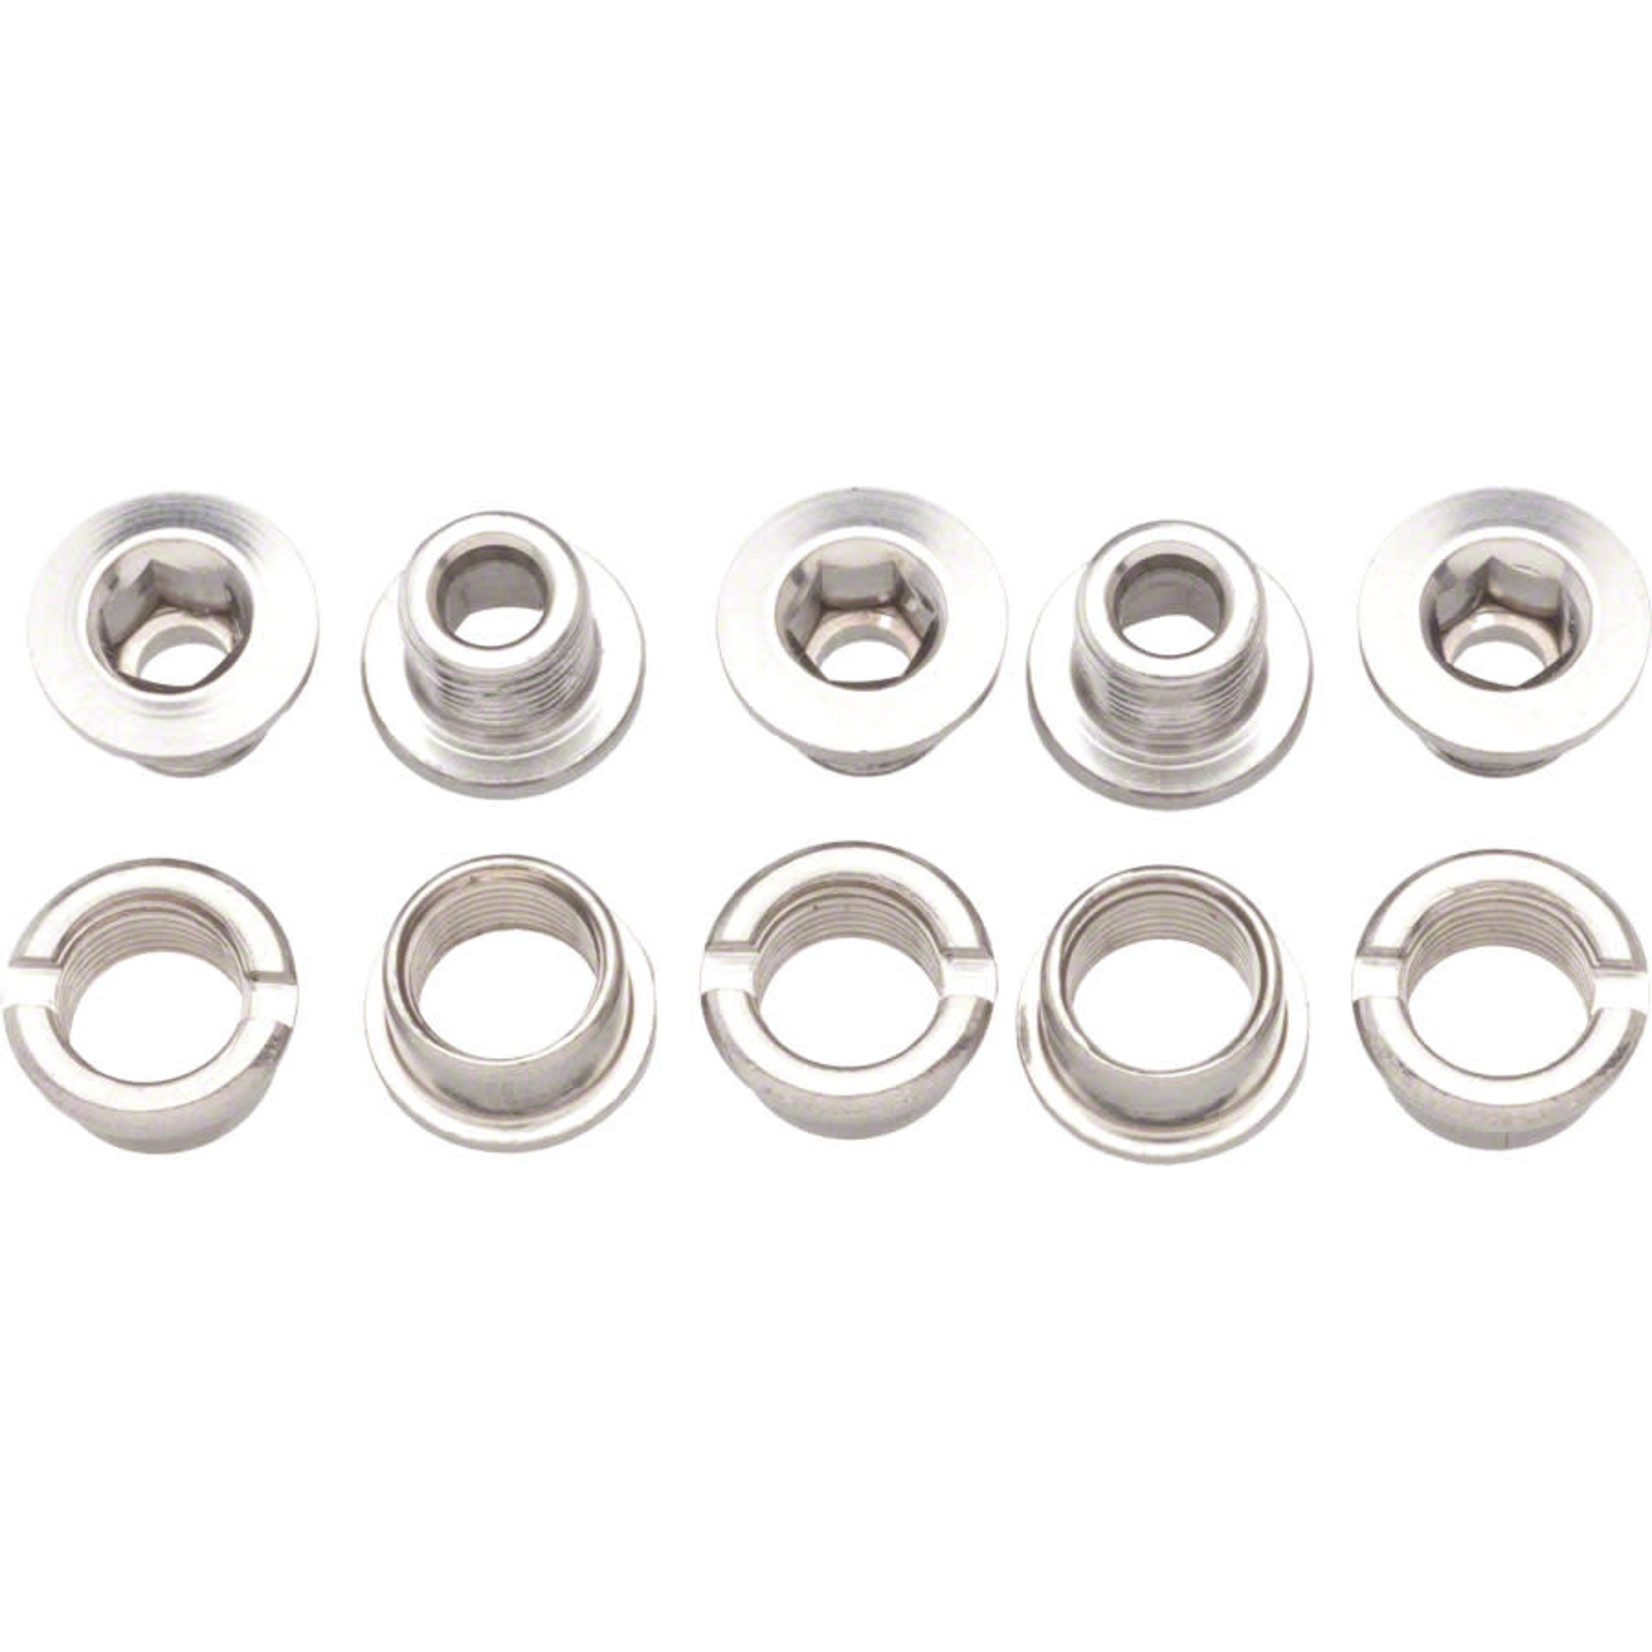 Problem Solvers Problem Solvers Sngl 6mm Cring bolts alloy Silver set/5